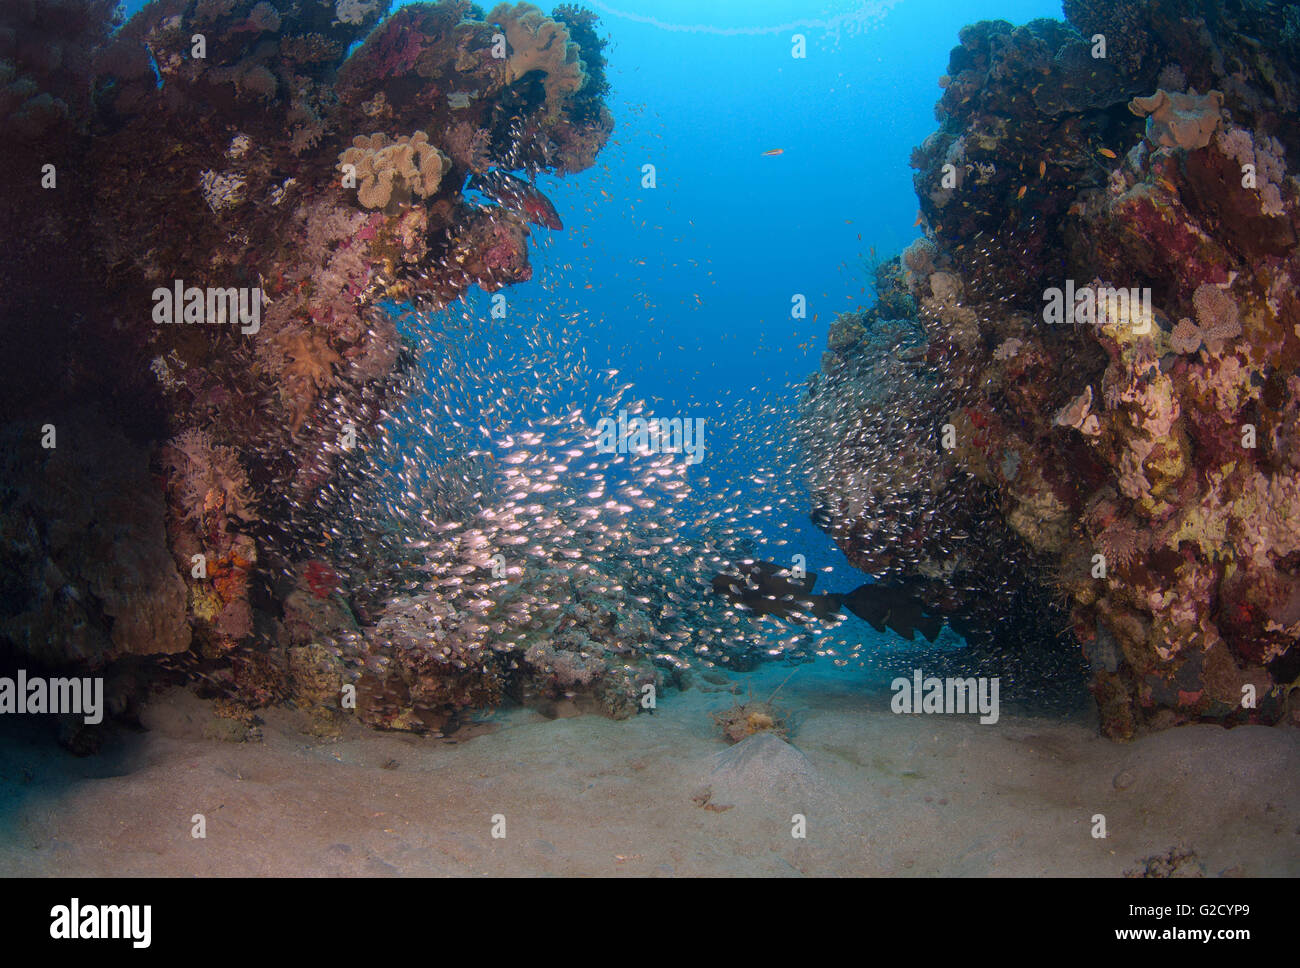 May 27, 2015 - Red Sea, Egypt - School of Silver Sweeper, Silver Glassy Sweepe, Glassfish, Pigmy Sweeper, Ransonnet's bullseye, Rosy sweep, Slender sweeper or White sweeper (Parapriacanthus ransonneti) Red sea, Egypt, Africa (Credit Image: © Andrey Nekrasov/ZUMA Wire/ZUMAPRESS.com) Stock Photo